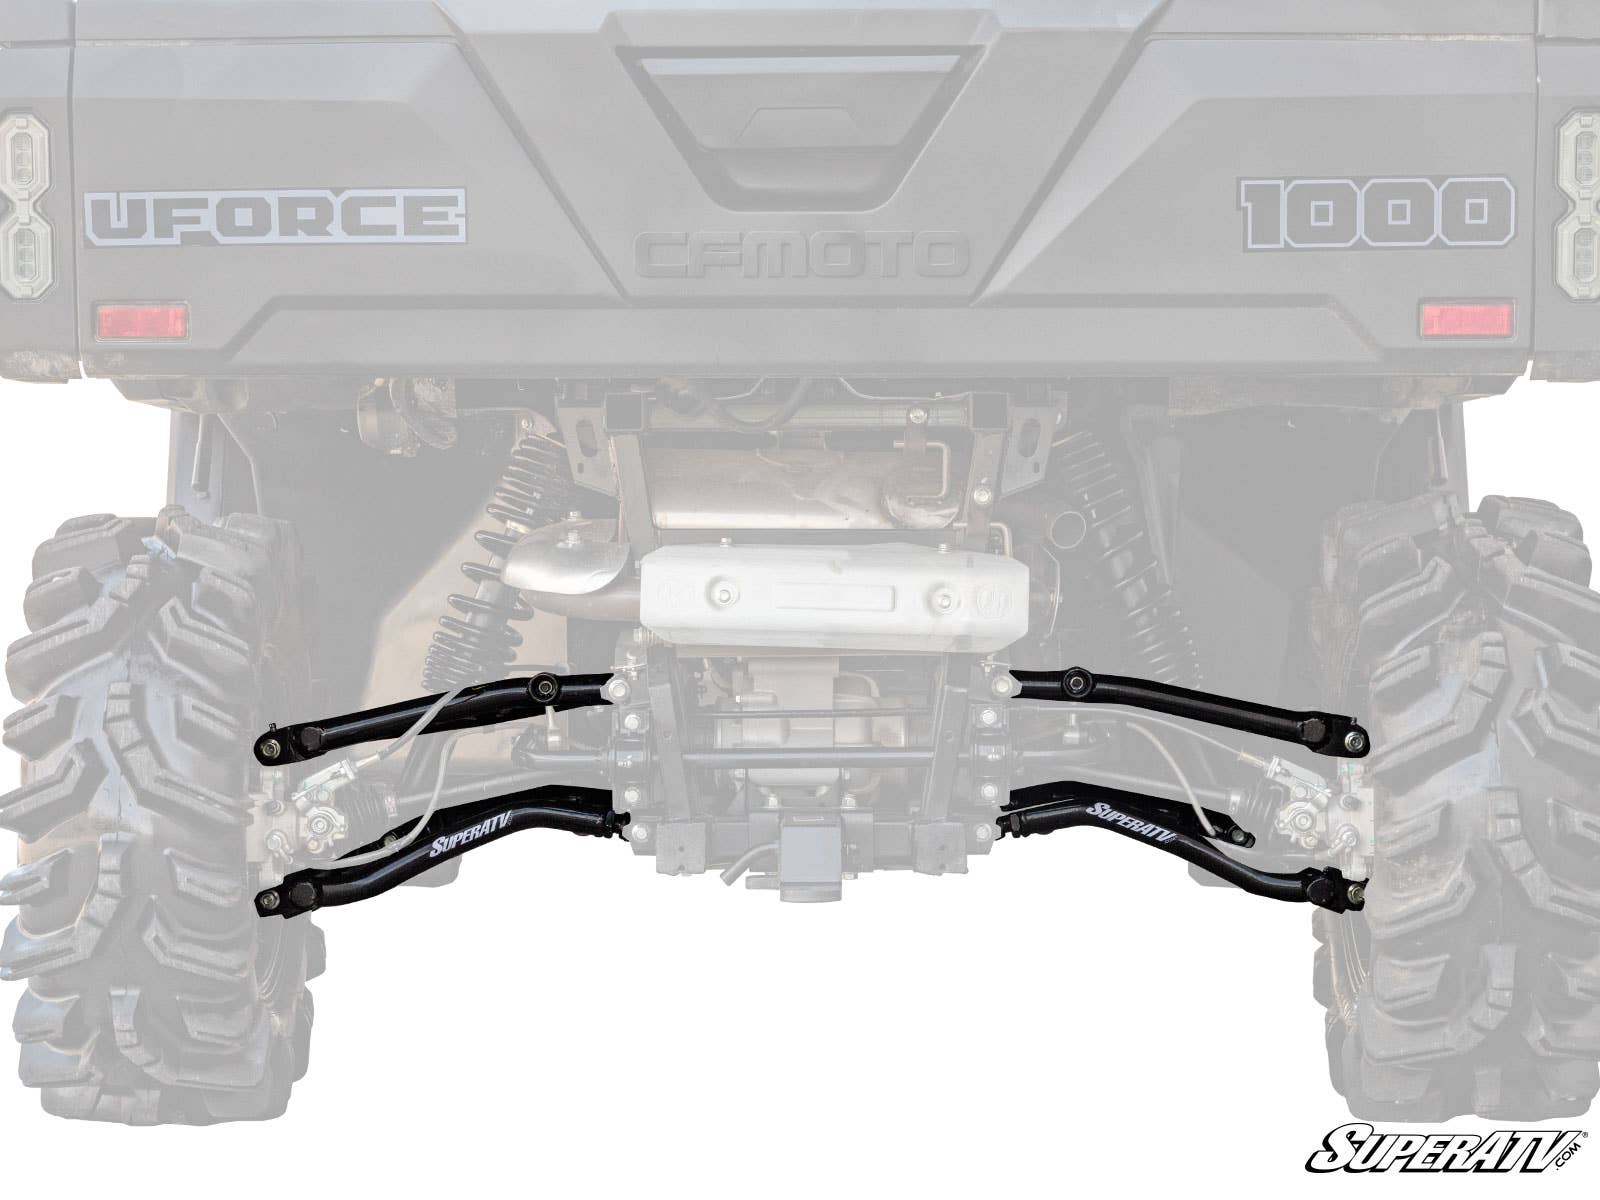 CFMOTO UFORCE 1000 HIGH CLEARANCE 1.5" REAR OFFSET A-ARMS